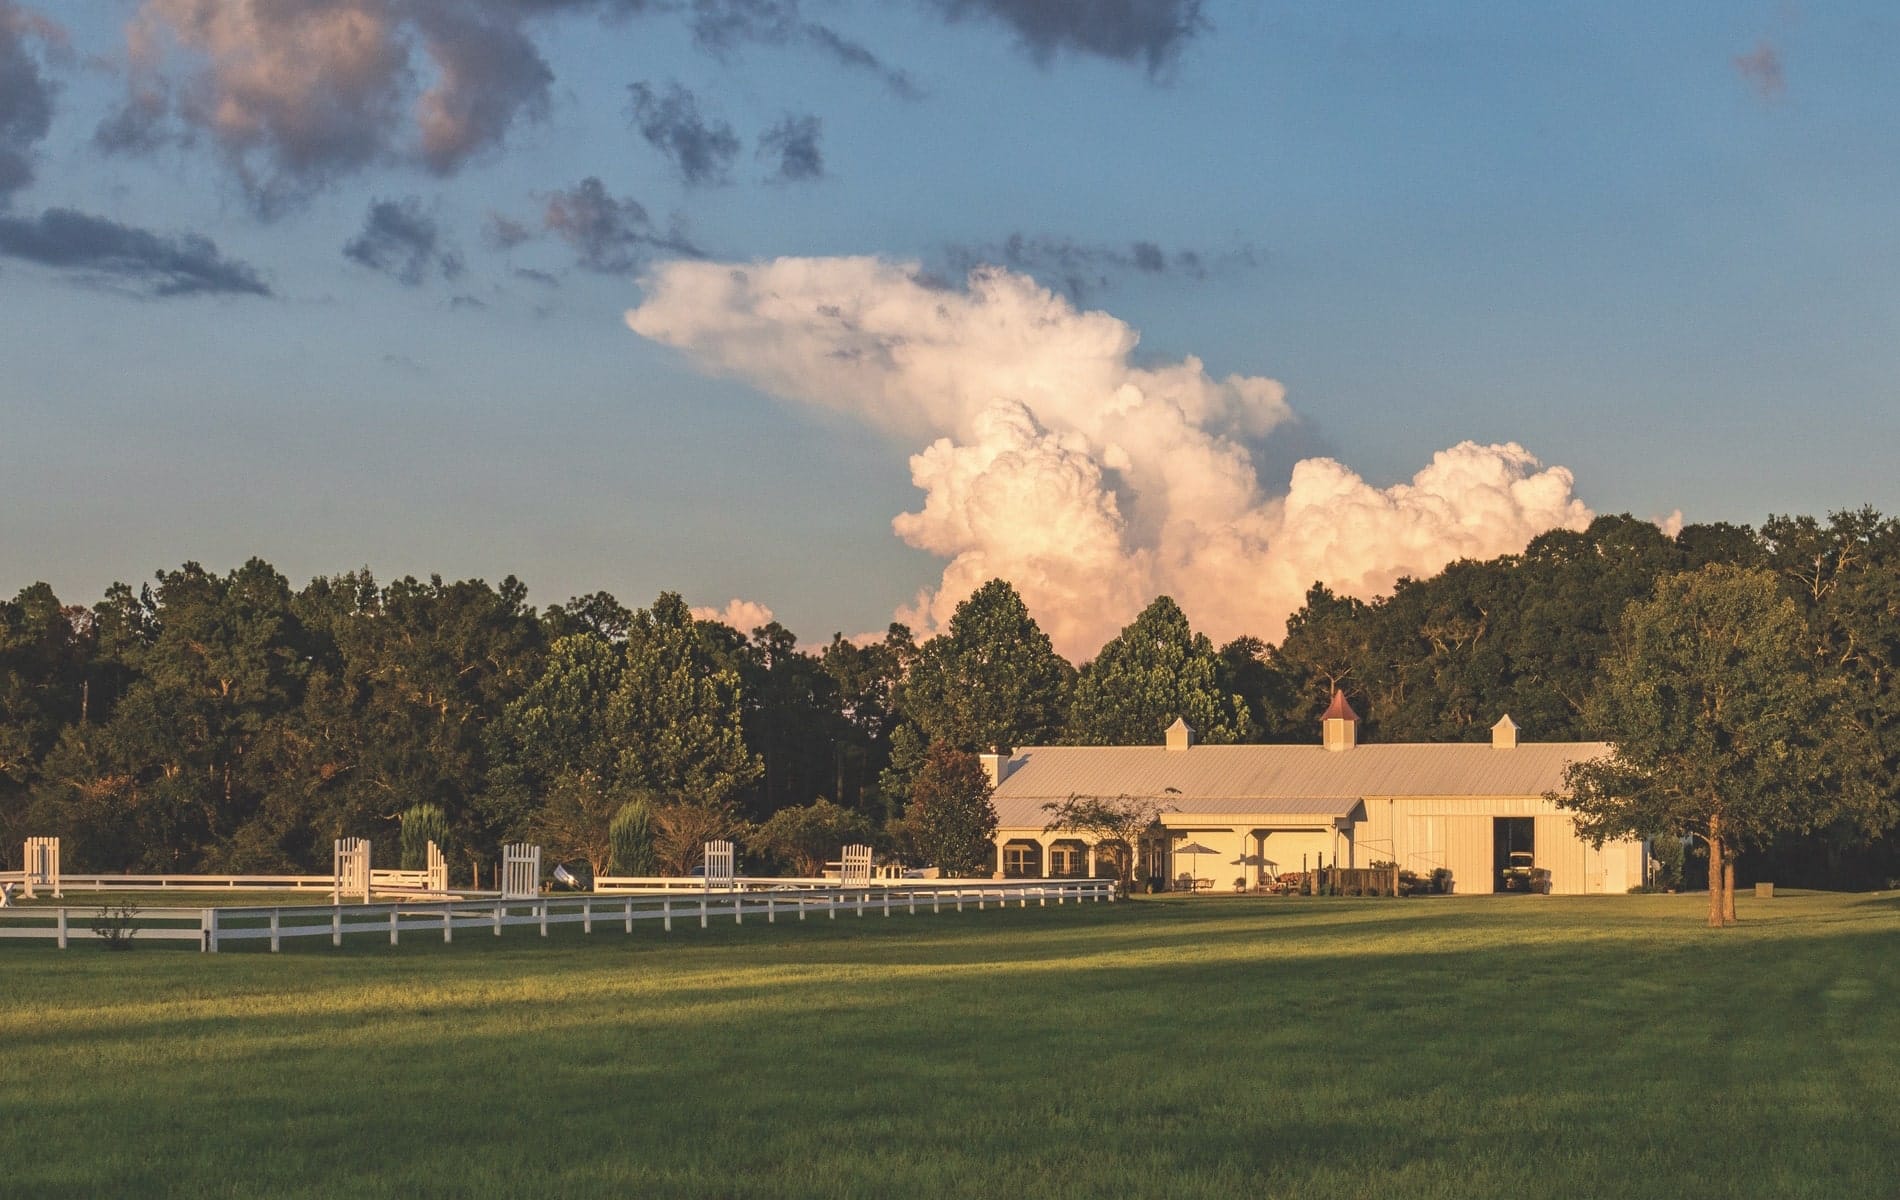 Architect Geoff Chick converted this beautiful barn in DeFuniak Springs, Florida, into a family home with connected stables and loft hangout space.